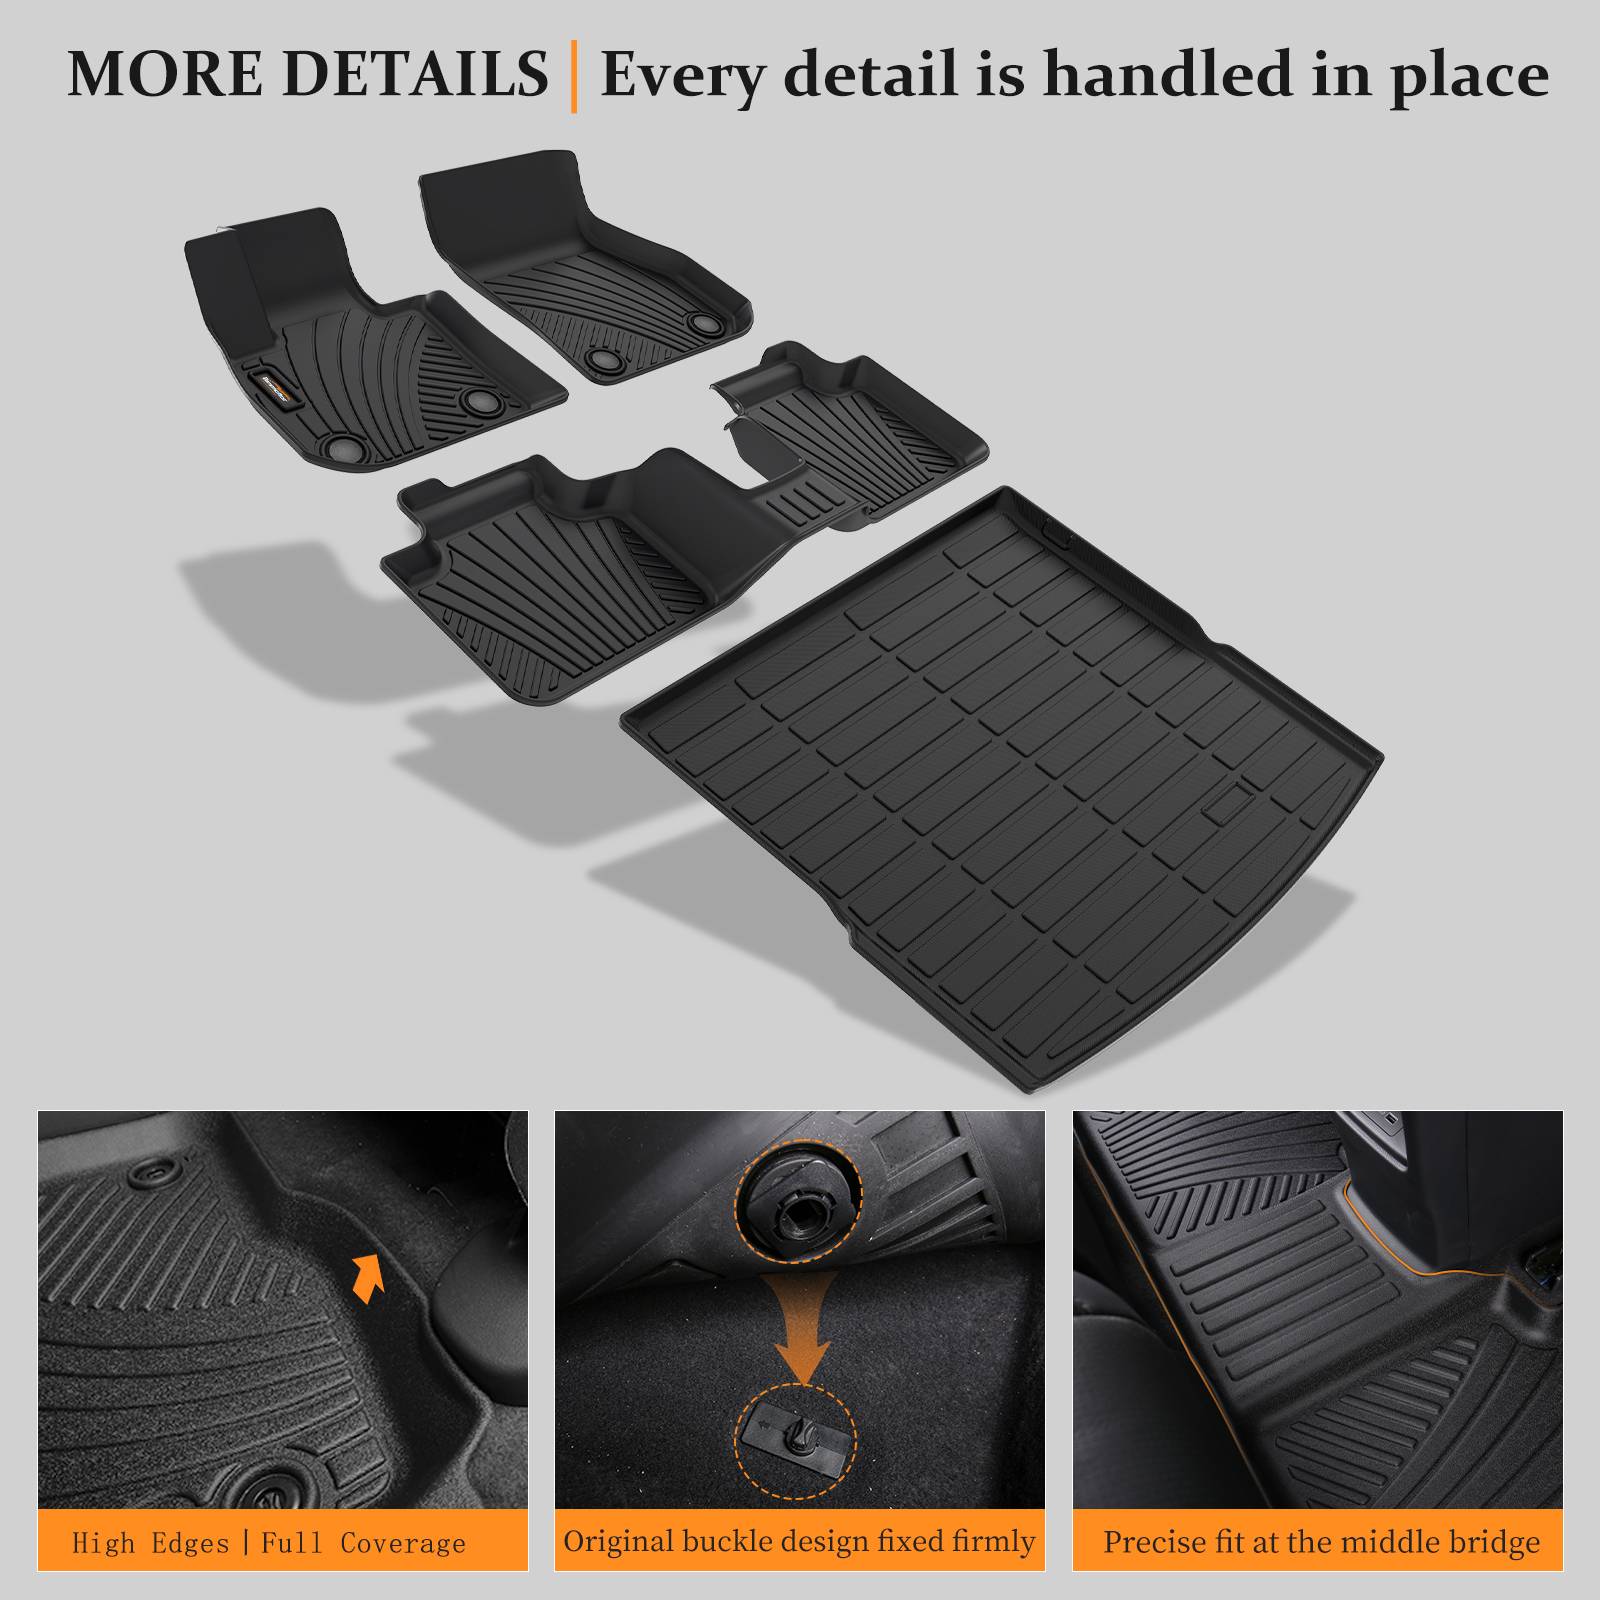 Binmotor-Floor Mats & Cargo Liner Set for Prius Floor Mat and Cargo Liner Set for Toyota Prius Prime(PHEV) , All Weather Protection,Waterproof Car Mats（compatible year 2023）